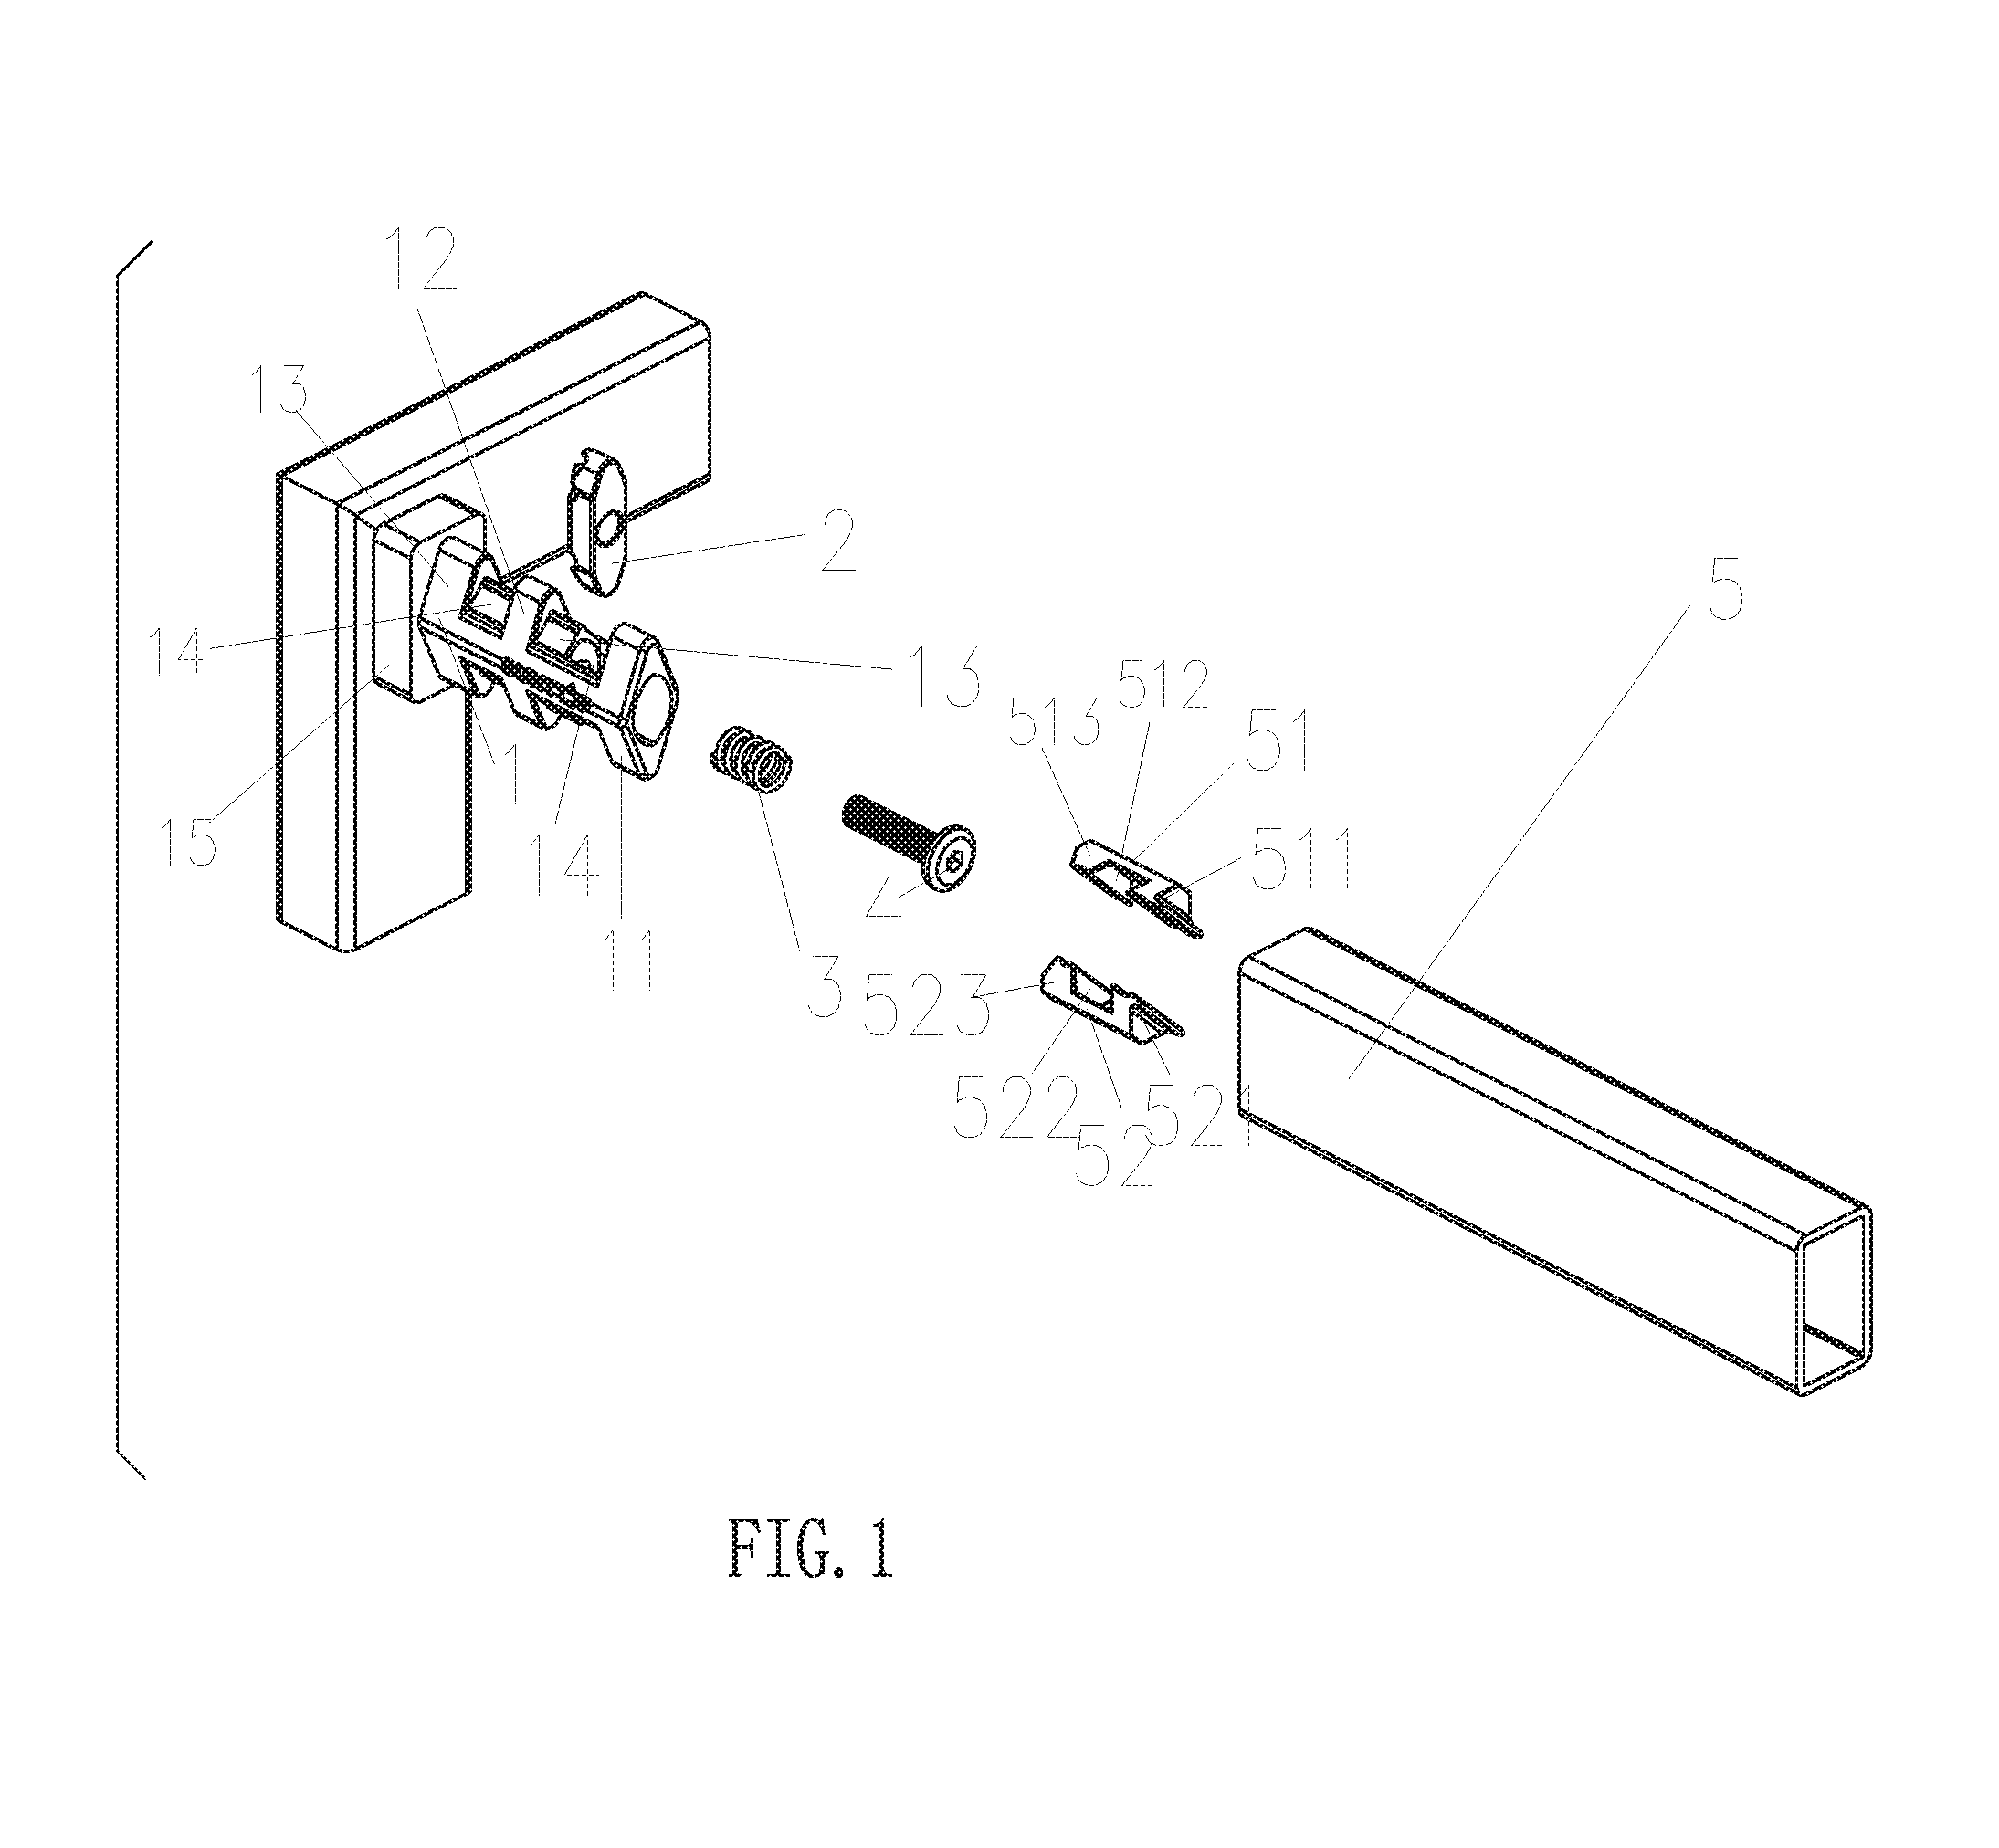 Lock fixing mechanism with quick assembly and disassembly and a booth applied with the mechanism